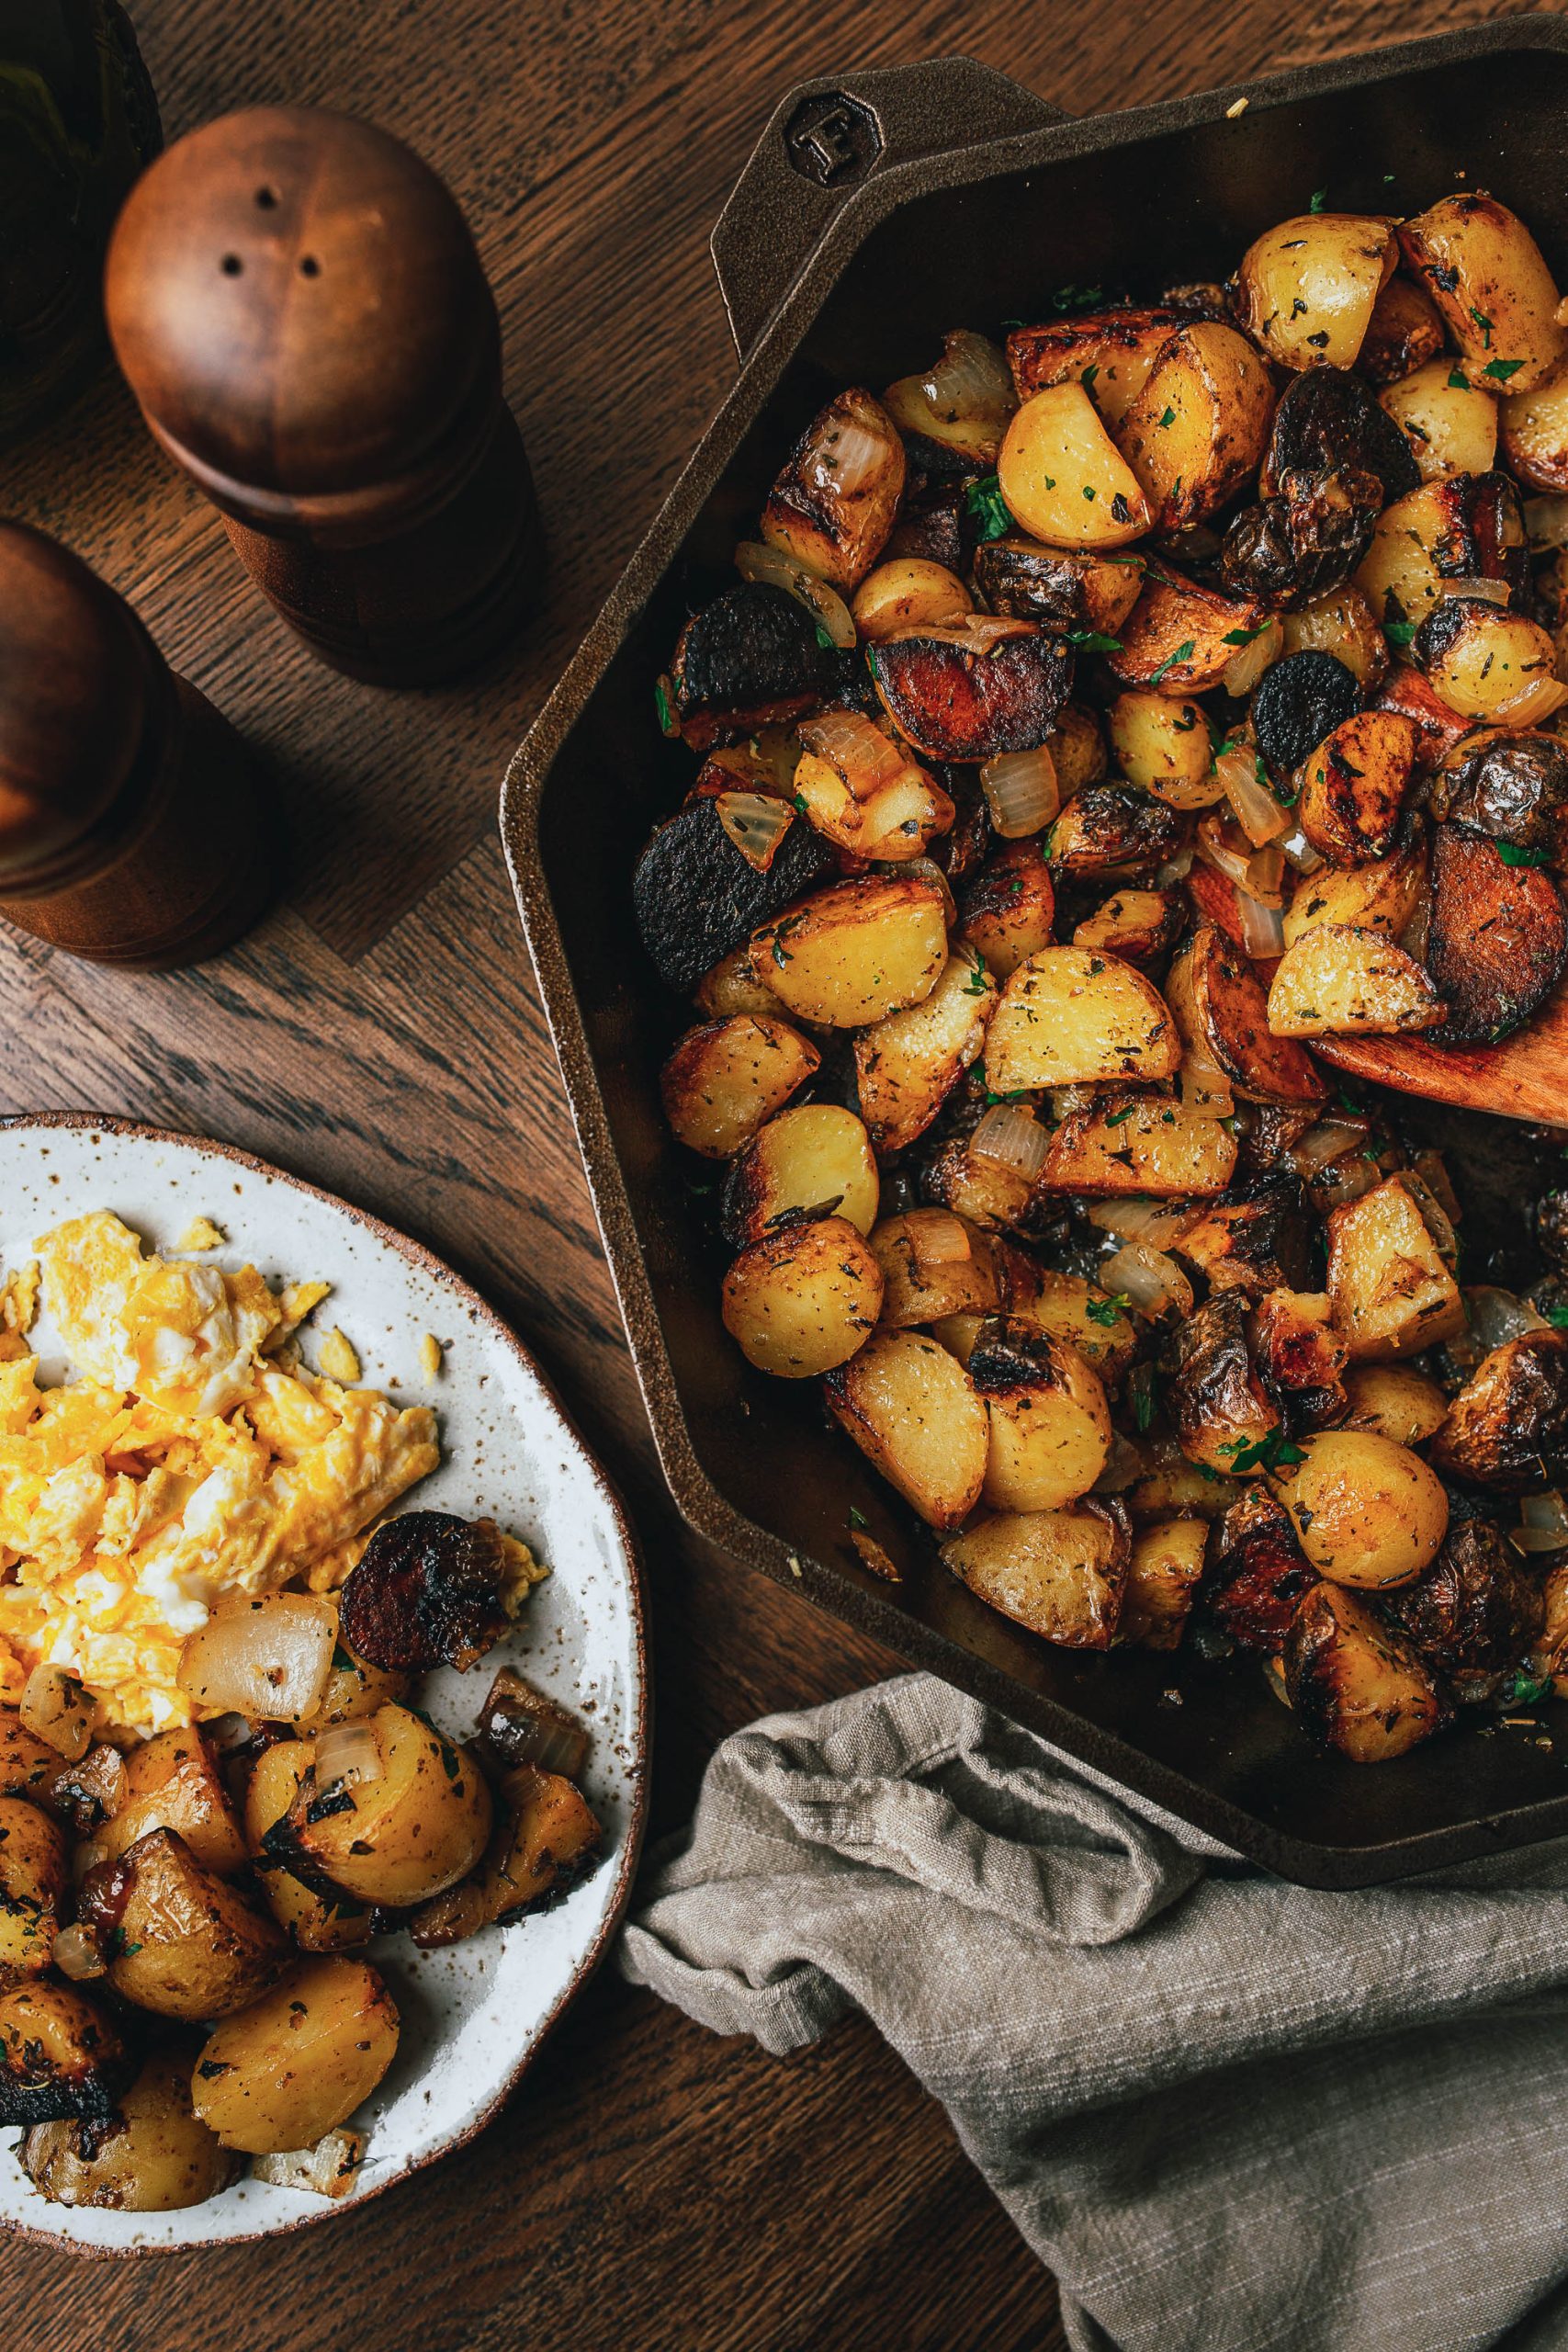 A skillet filled with cooked potatoes and vegetables is on a wooden table. A separate plate with scrambled eggs and a serving of the potato dish is next to it. Salt and pepper shakers are nearby.